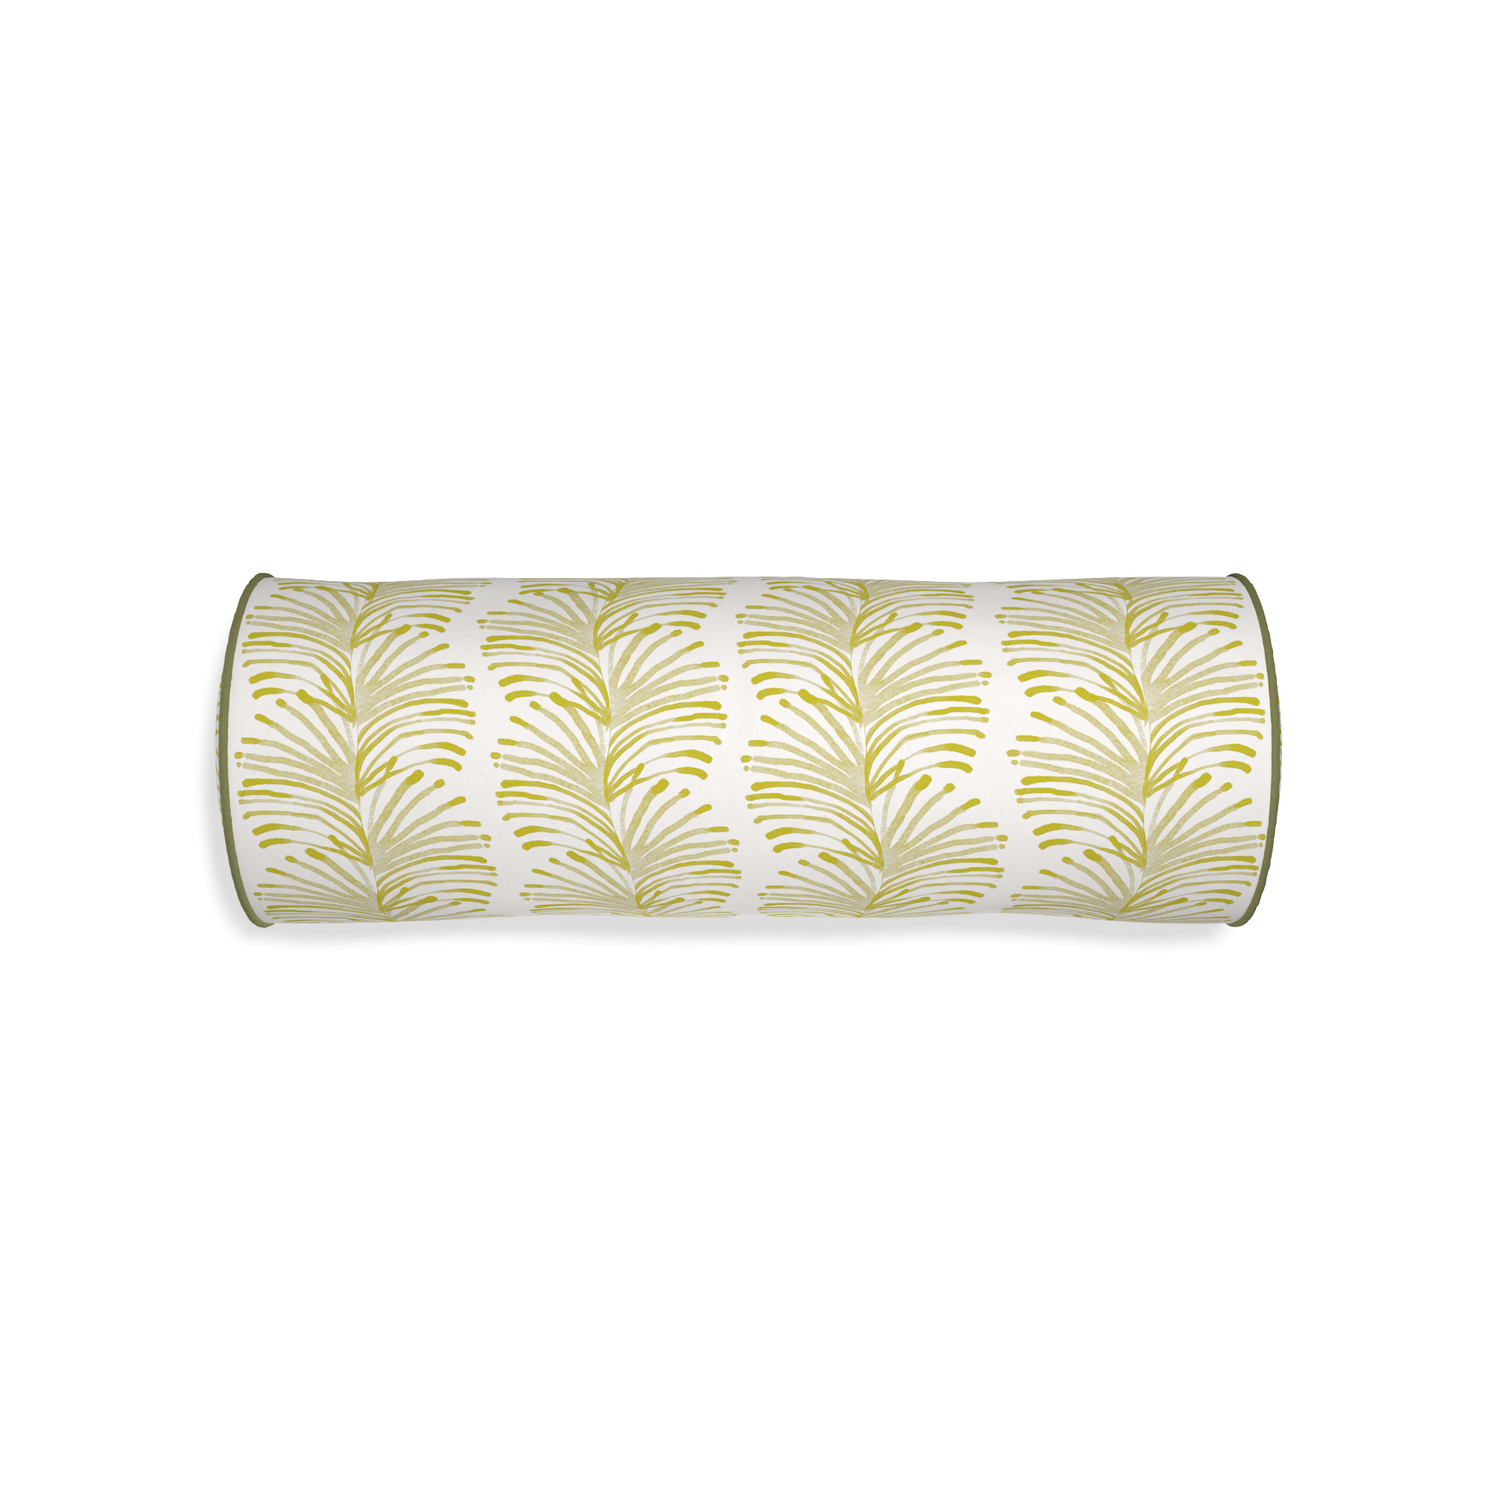 bolster chartreuse botanical stripe pillow with moss green piping